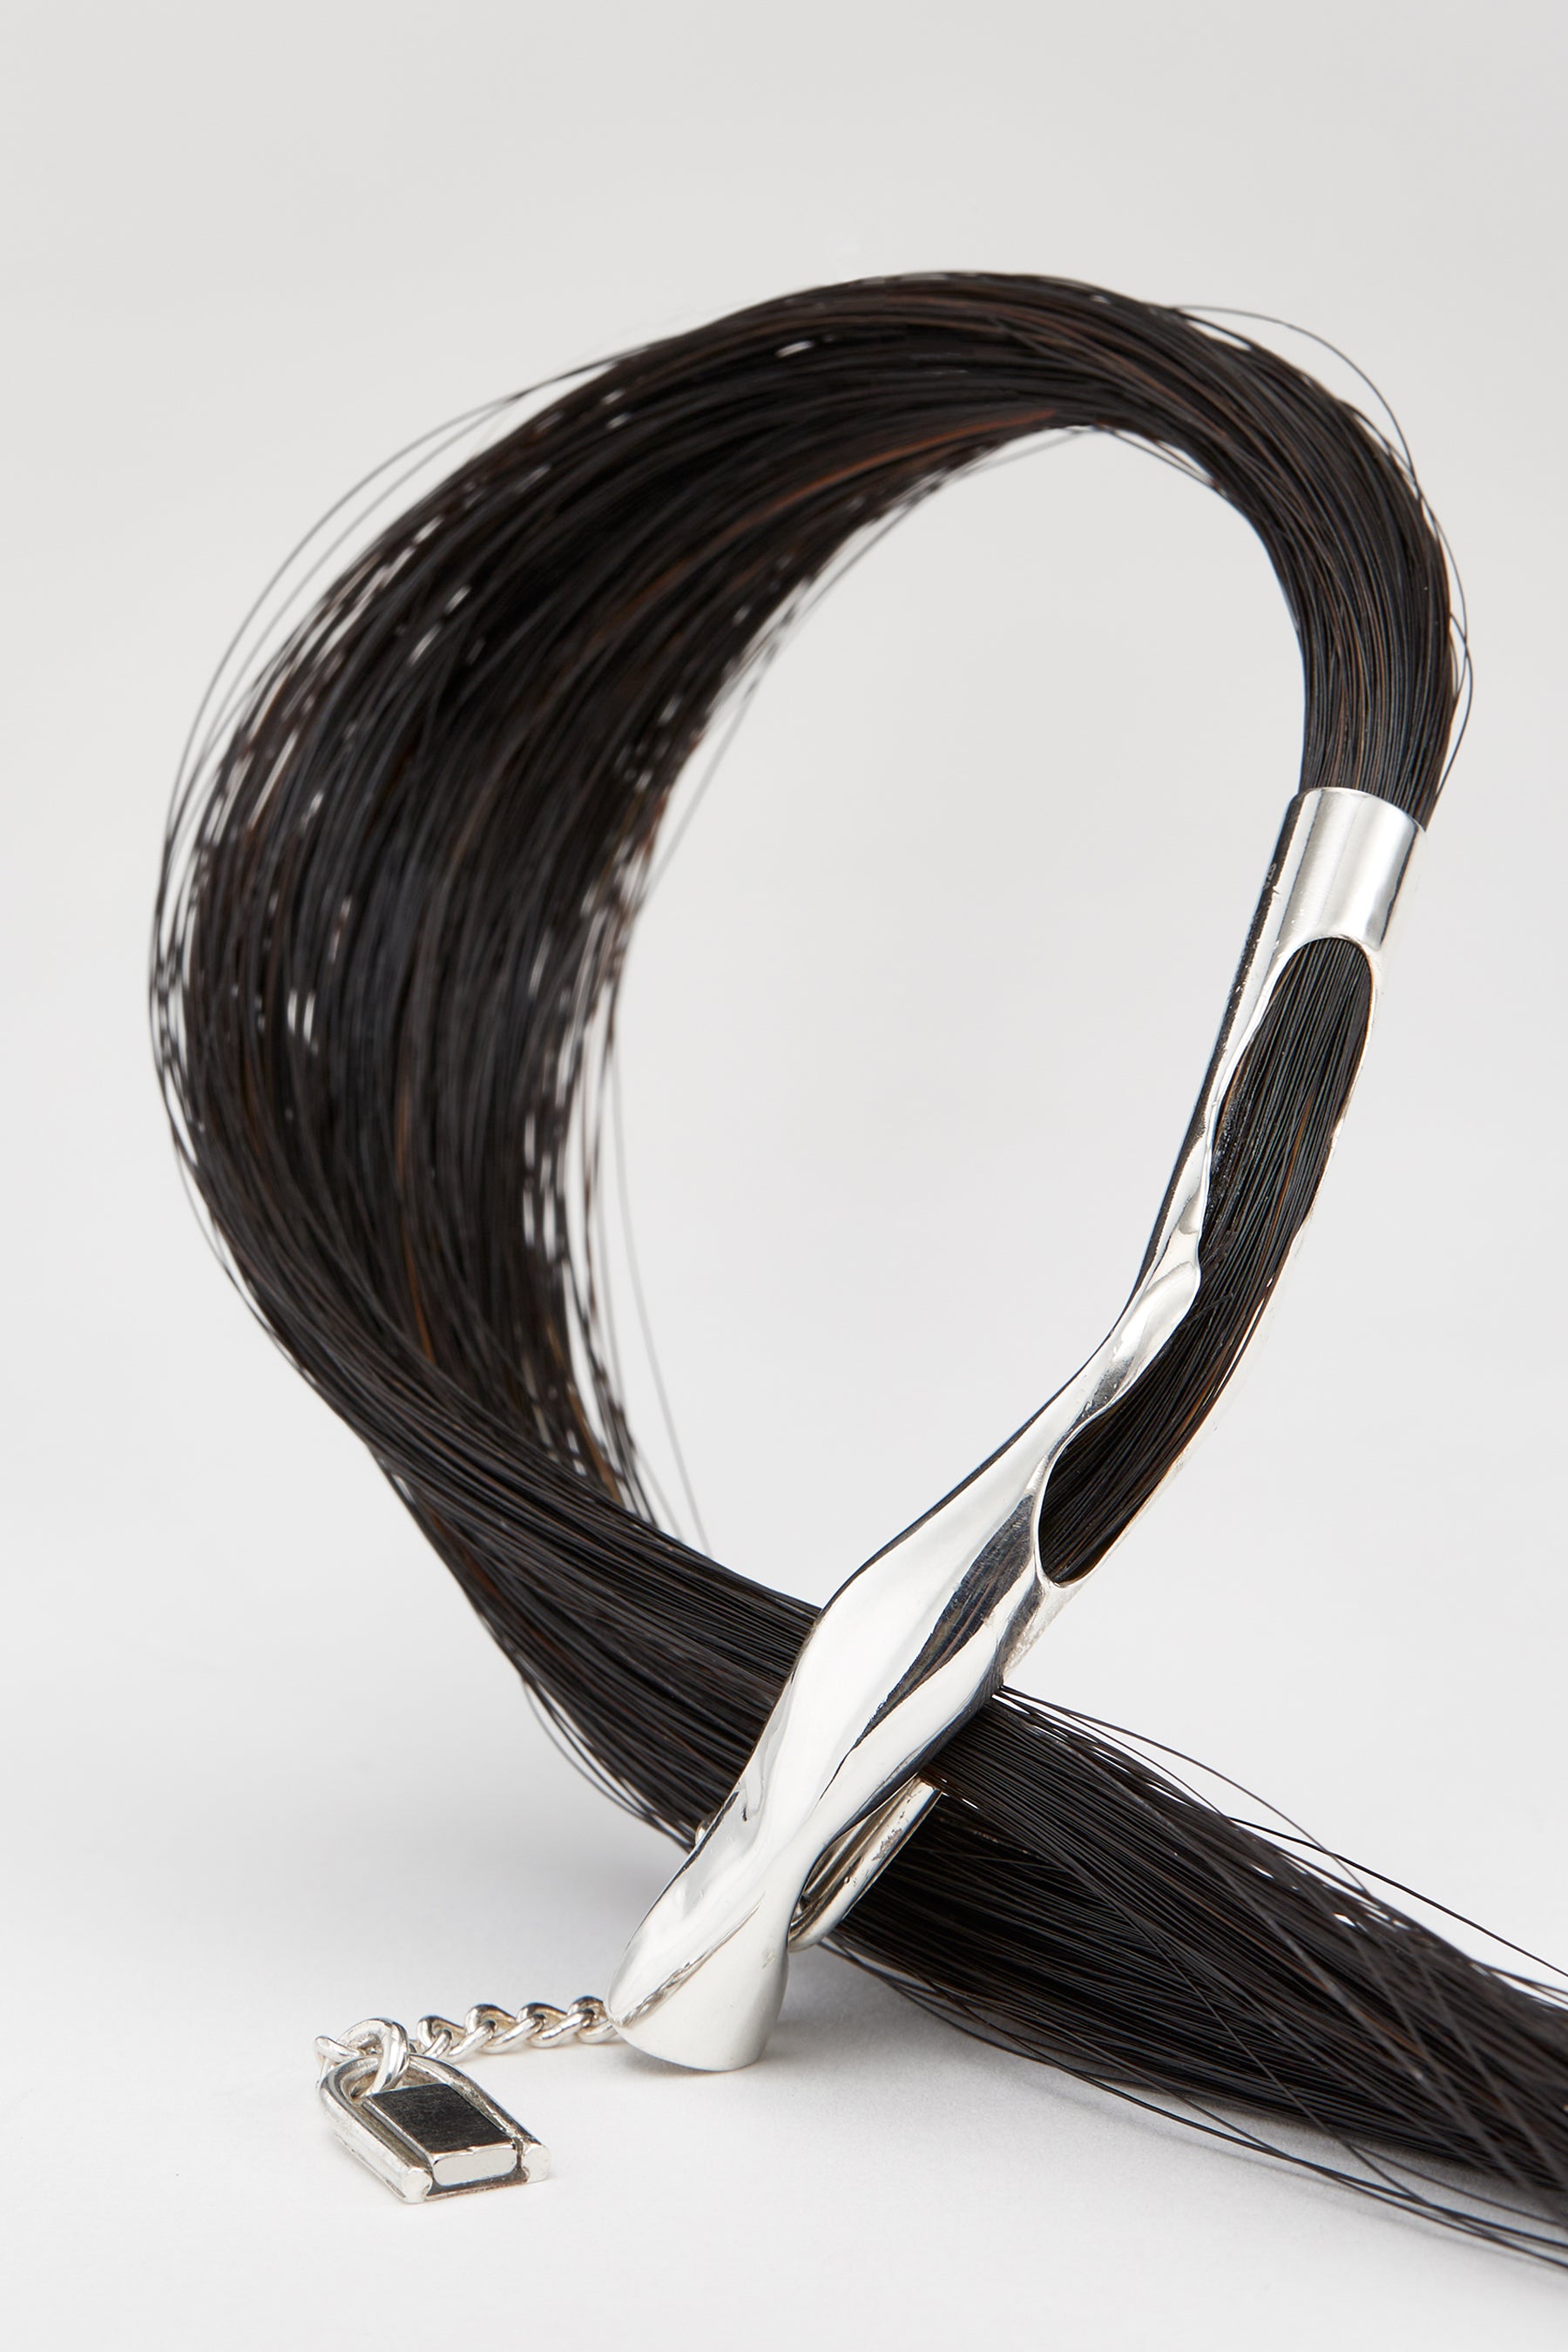 Silver Tube with Black Horse Tail Hair